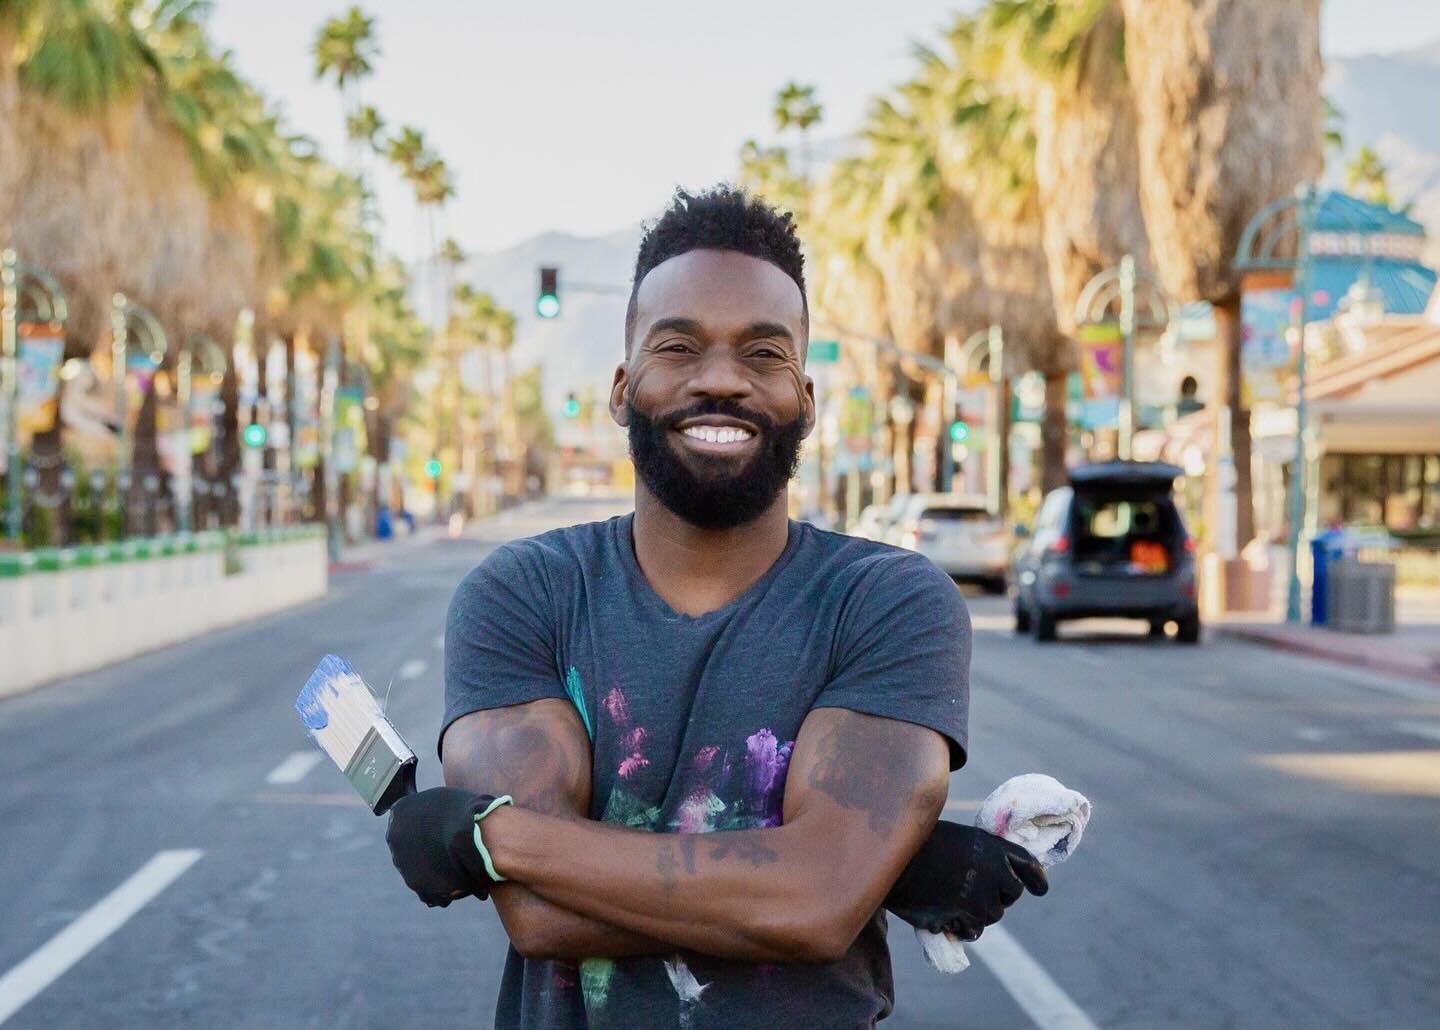 📢 We are thrilled to learn that award-winning filmmaker,  international artist, and muralist  @tysenknight will be at Taste of Tennis! Click the link in profile to learn more about this exclusive event and grab your tickets! 
.
.
#tasteoftennis #ays